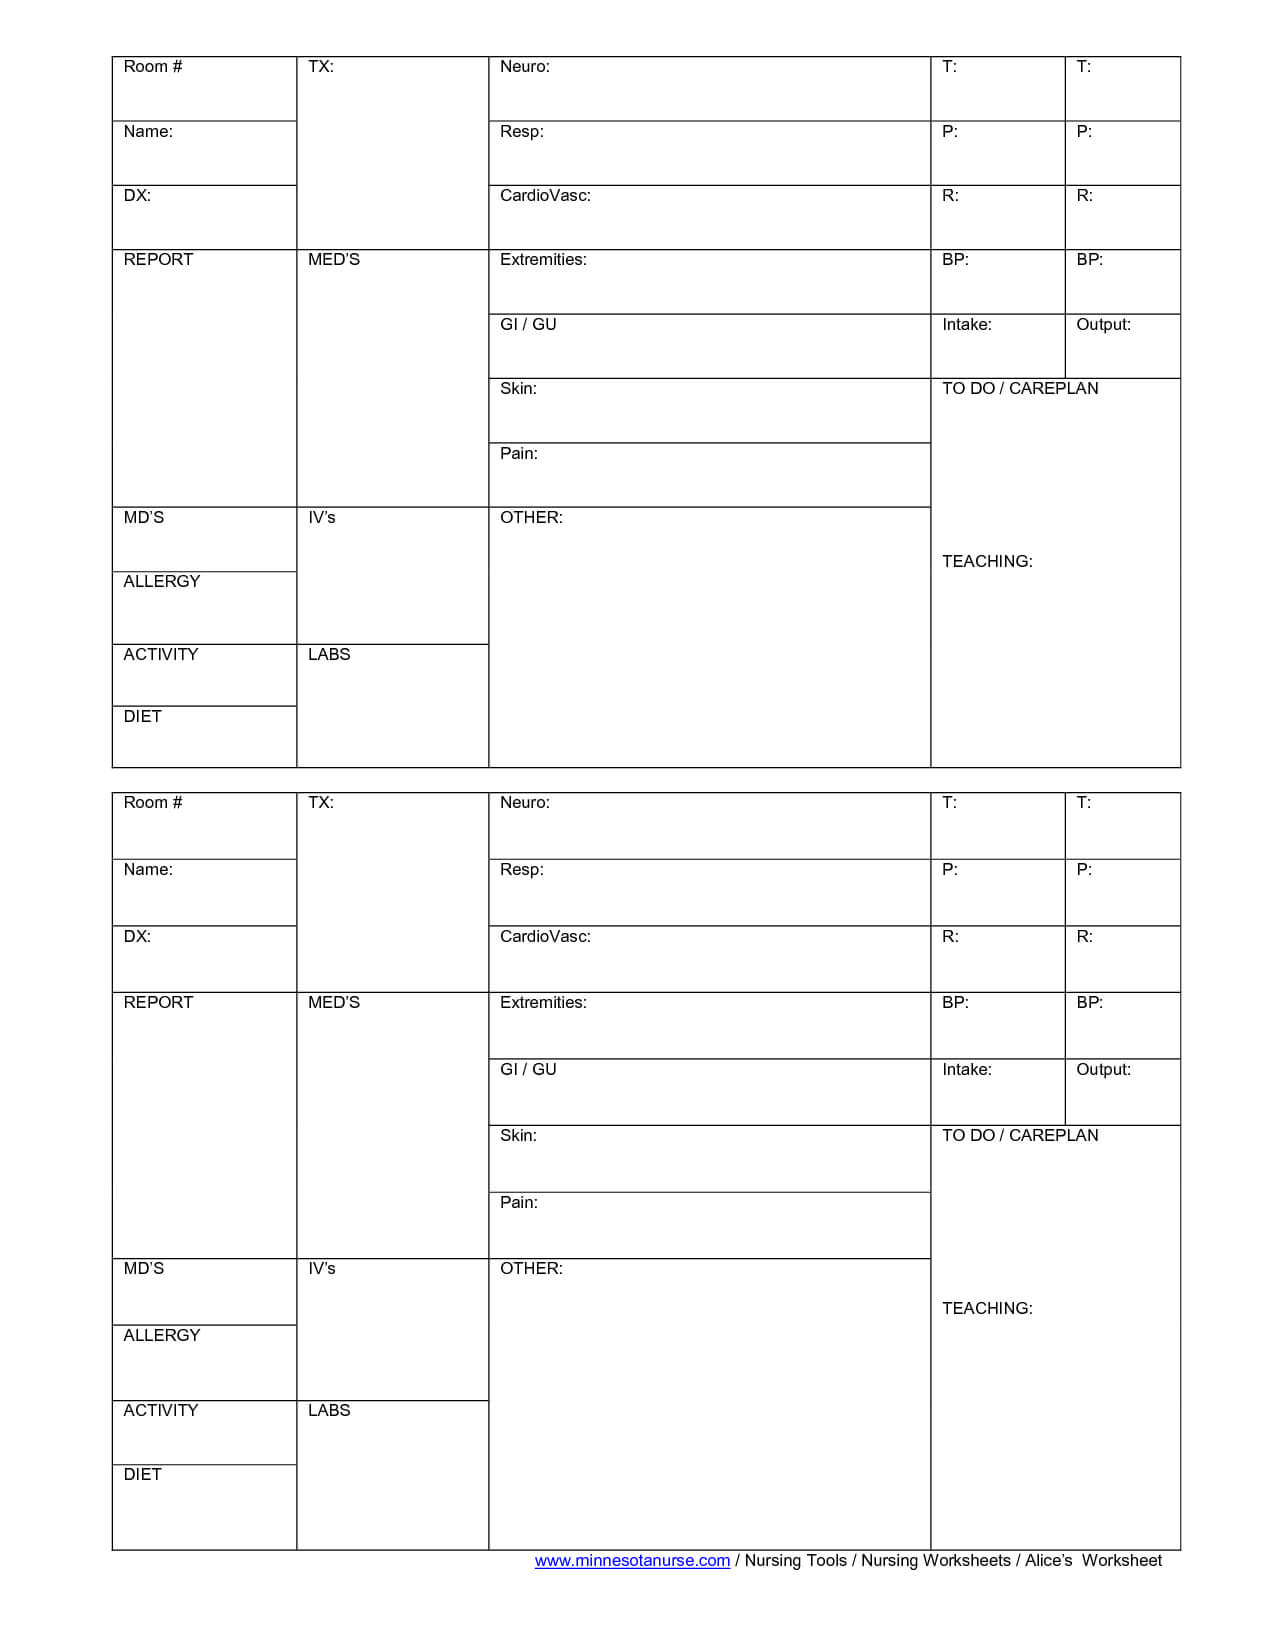 Blank Nursing Report Sheets For Newborns | Nursing Patient Intended For Charge Nurse Report Sheet Template